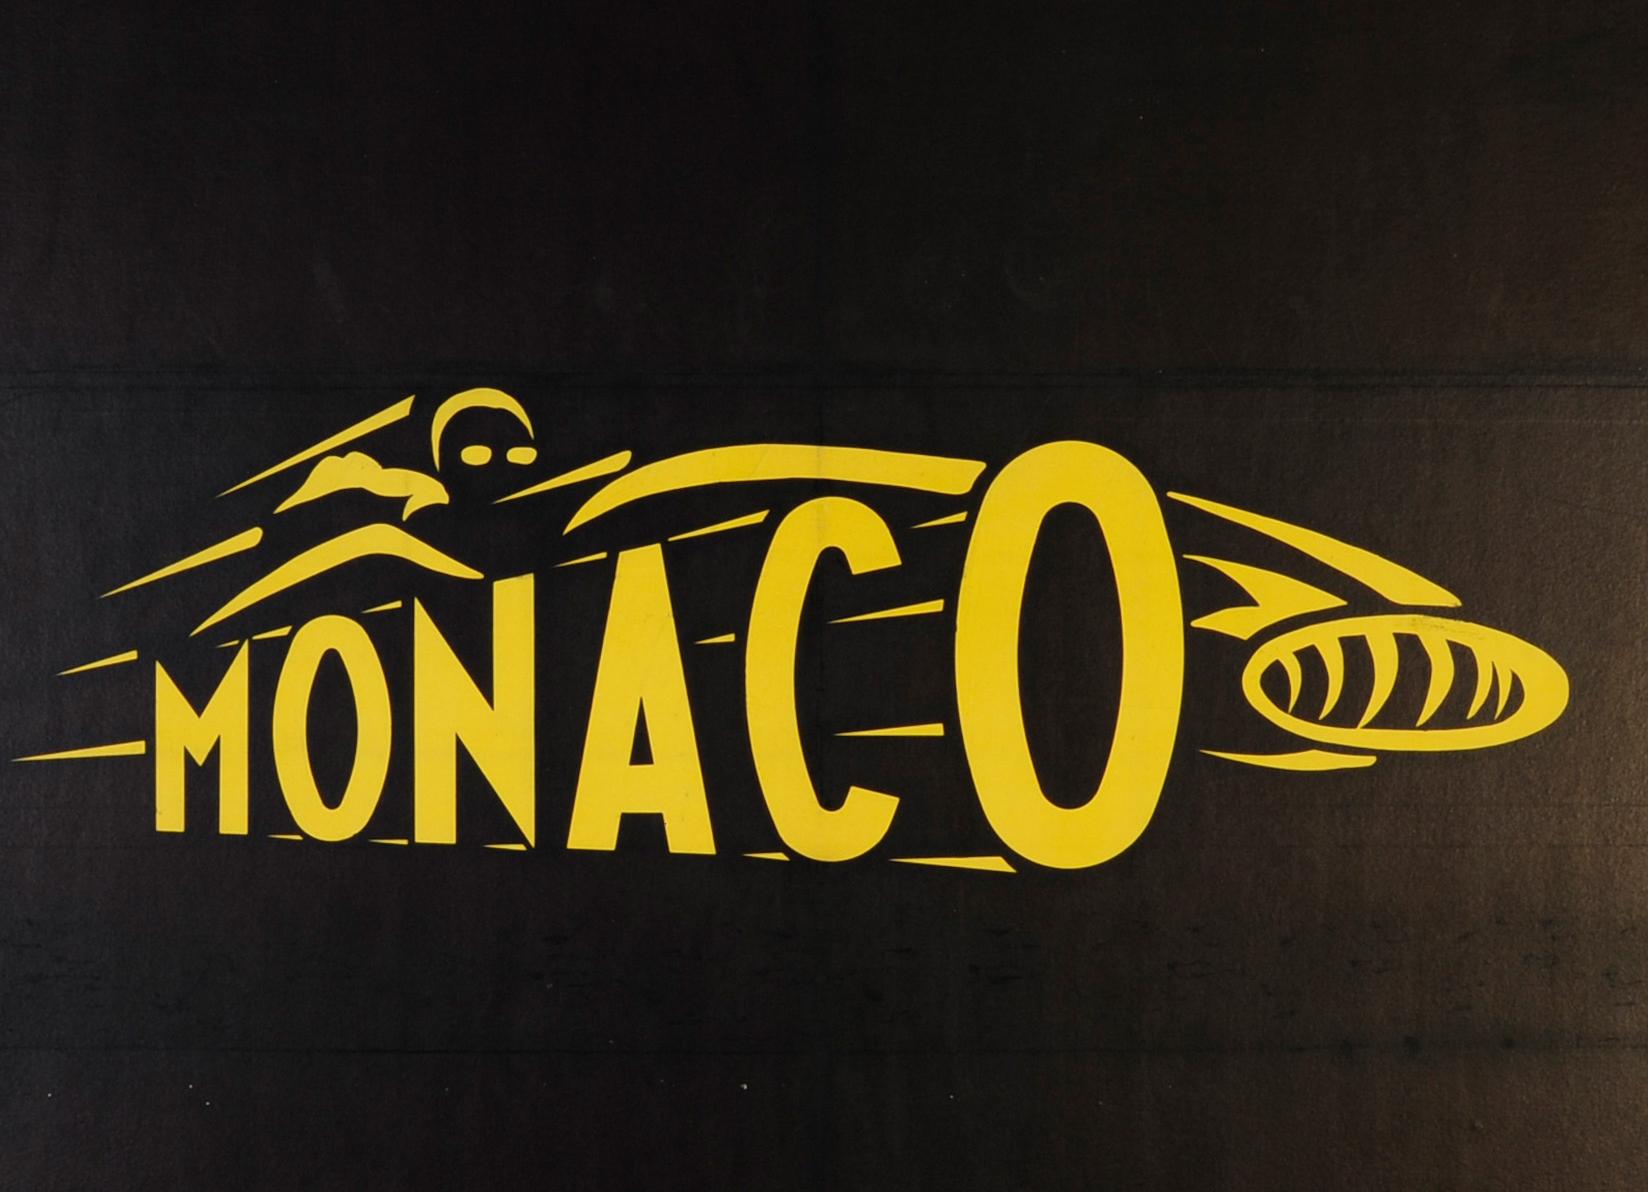 Original vintage sport poster for the 1961 Grand Prix Monaco Formula One motor race held on the Circuit de Monaco circuit in Monte Carlo featuring a great illustration against a dark background of the word Monaco in yellow stylised as a speeding